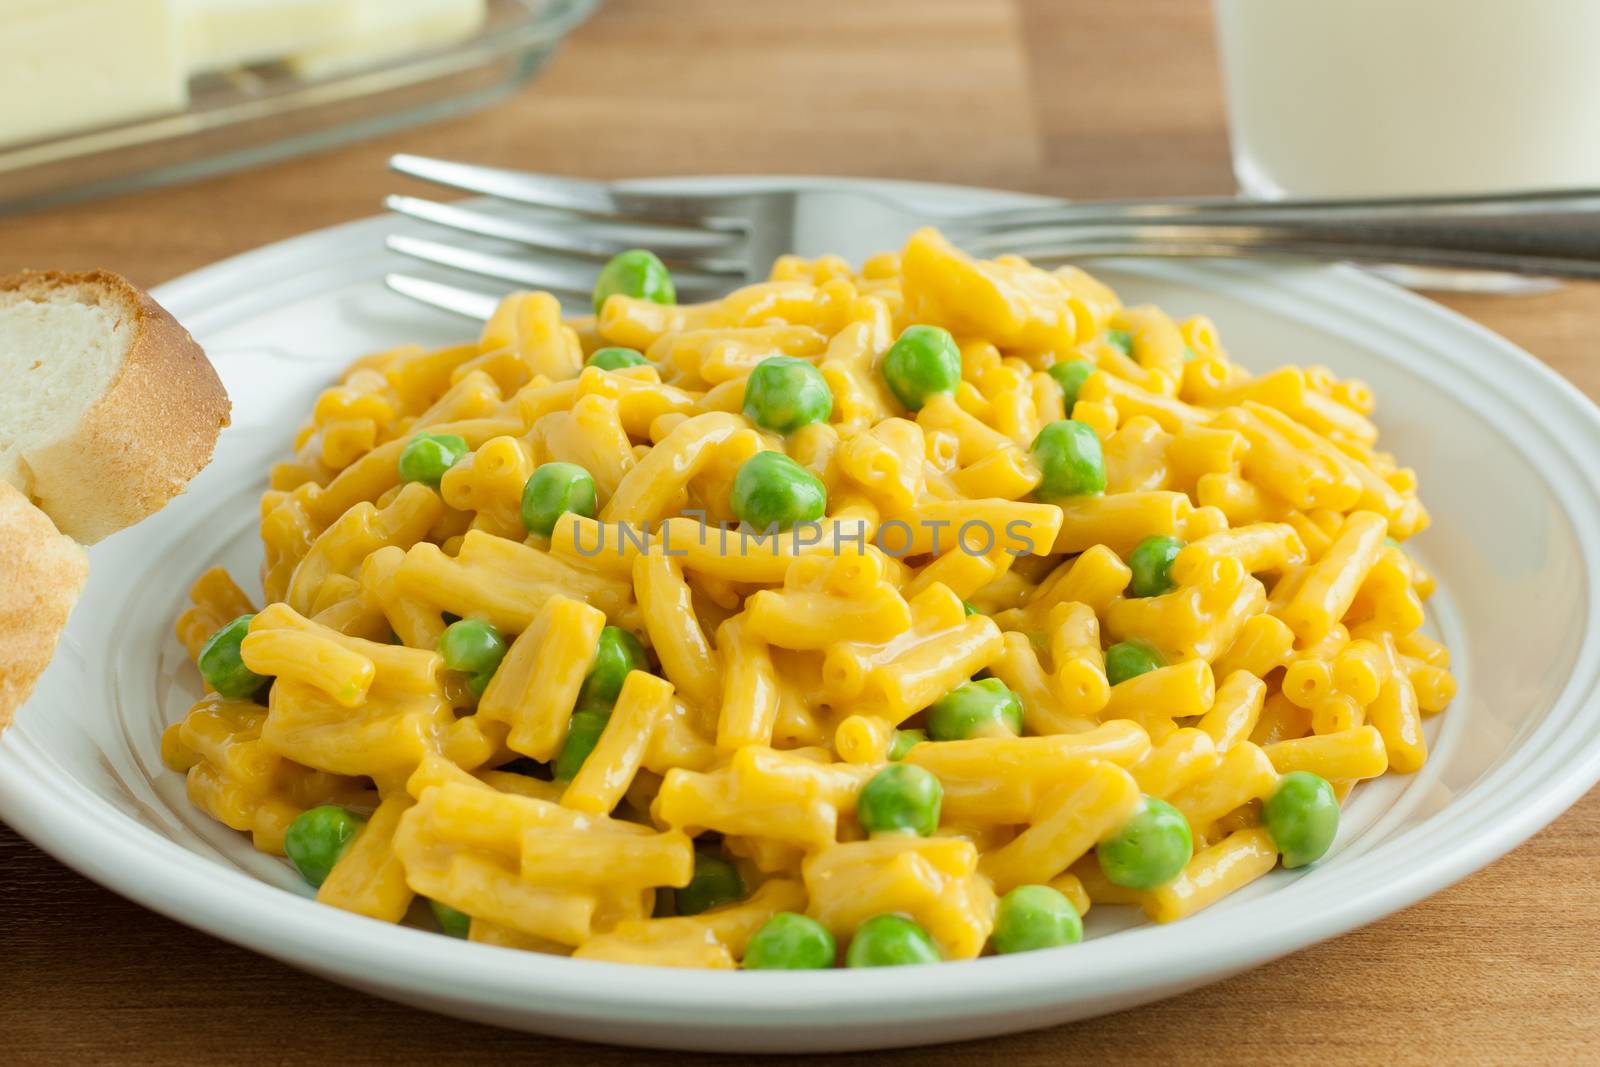 Macaroni and chesse dinner with peas, a slice of bread and butter, and a glass of milk.